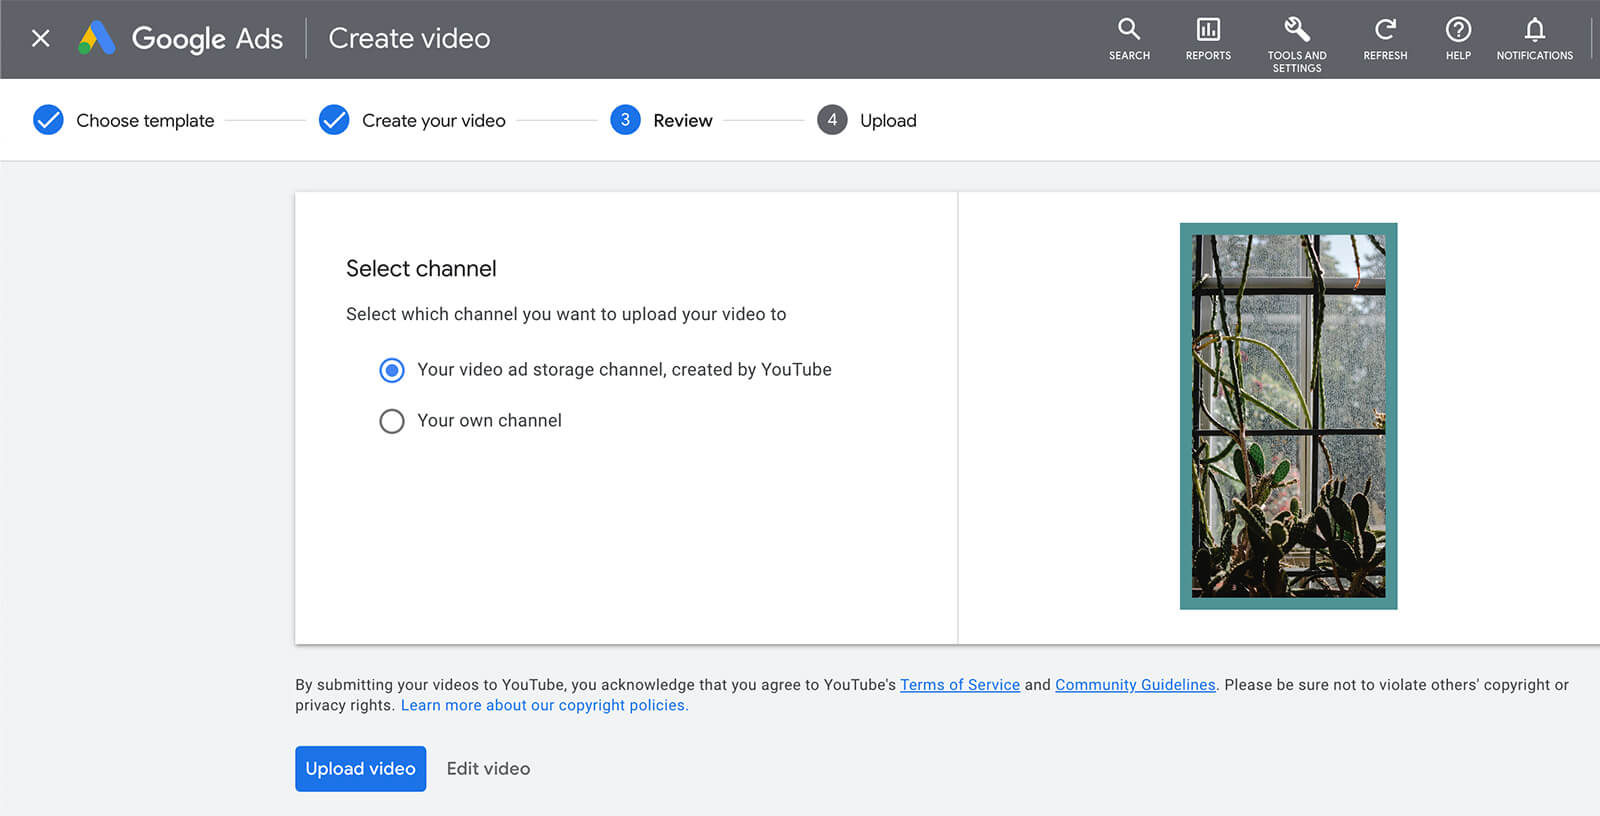 how-to-introduce-your-brand-using-youtube-vertical-video-ads-using-google-ads-asset-library-templates-publish-to-channel-keep-in-storage-add-to-campaign-example-6